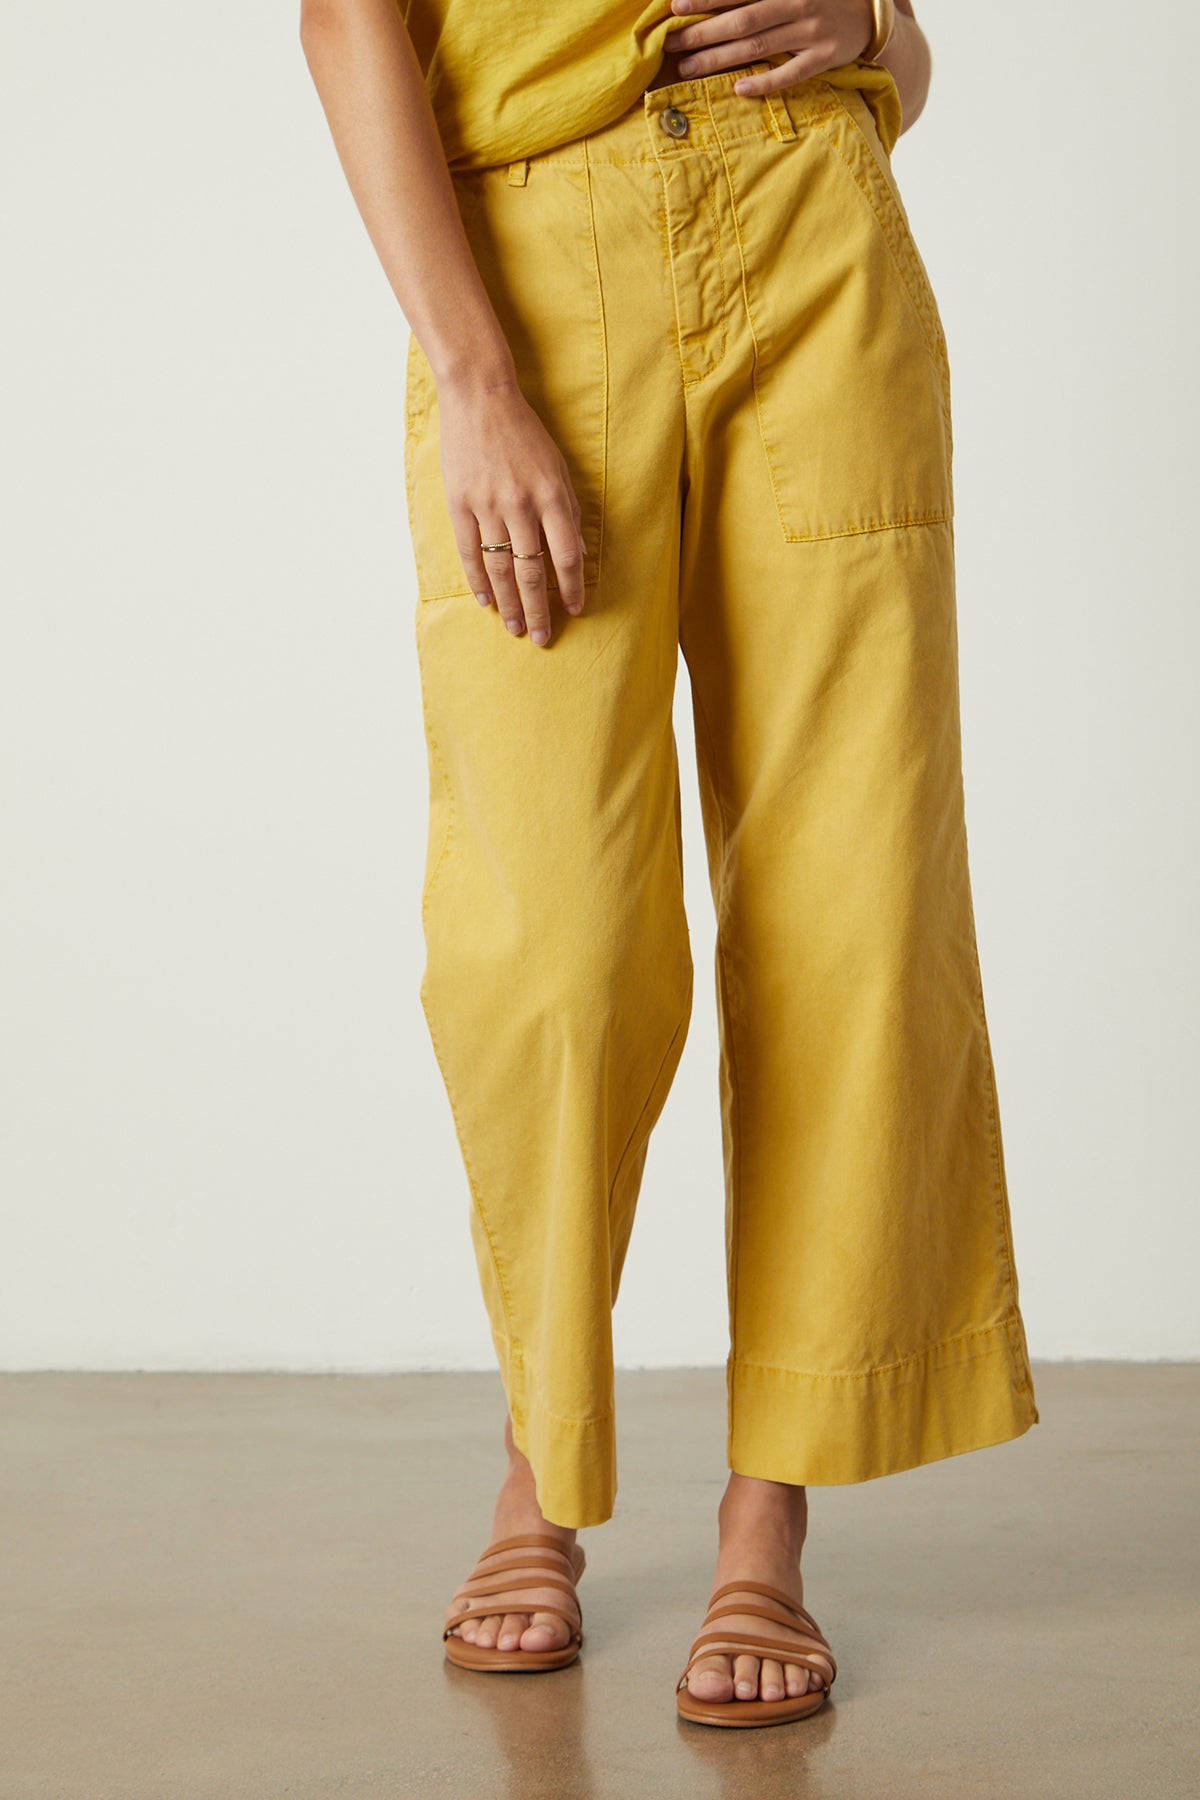 Mya Pant in golden yellow aurora color front-26022773424321